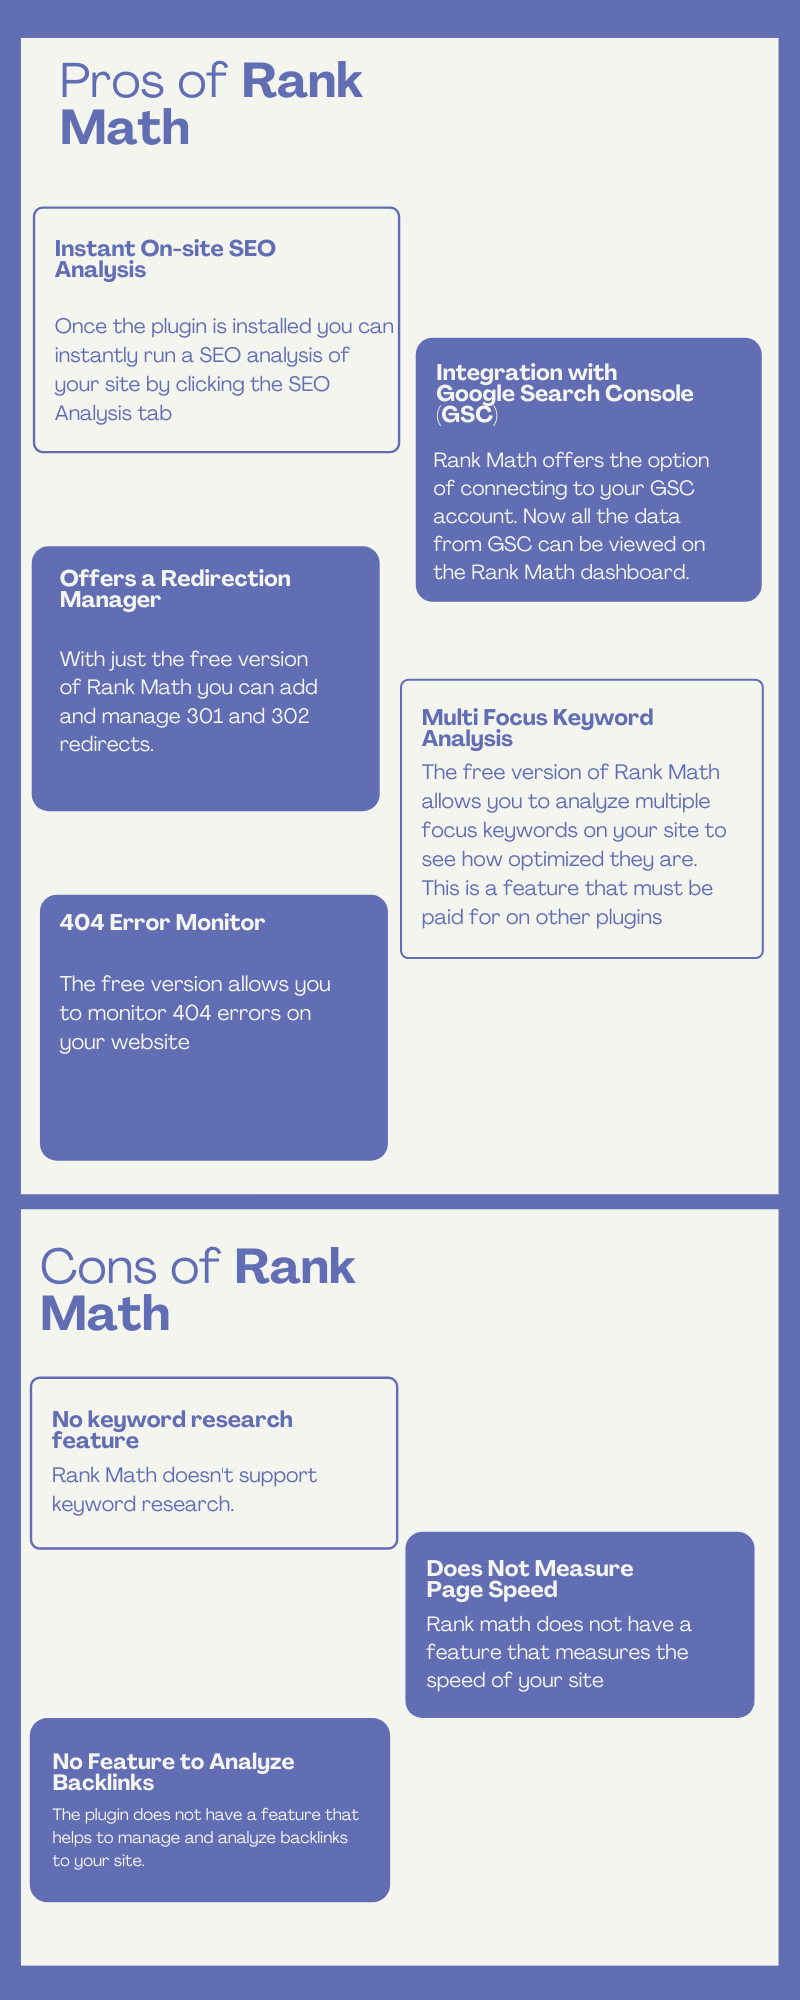 Pros and Cons of Rank Math